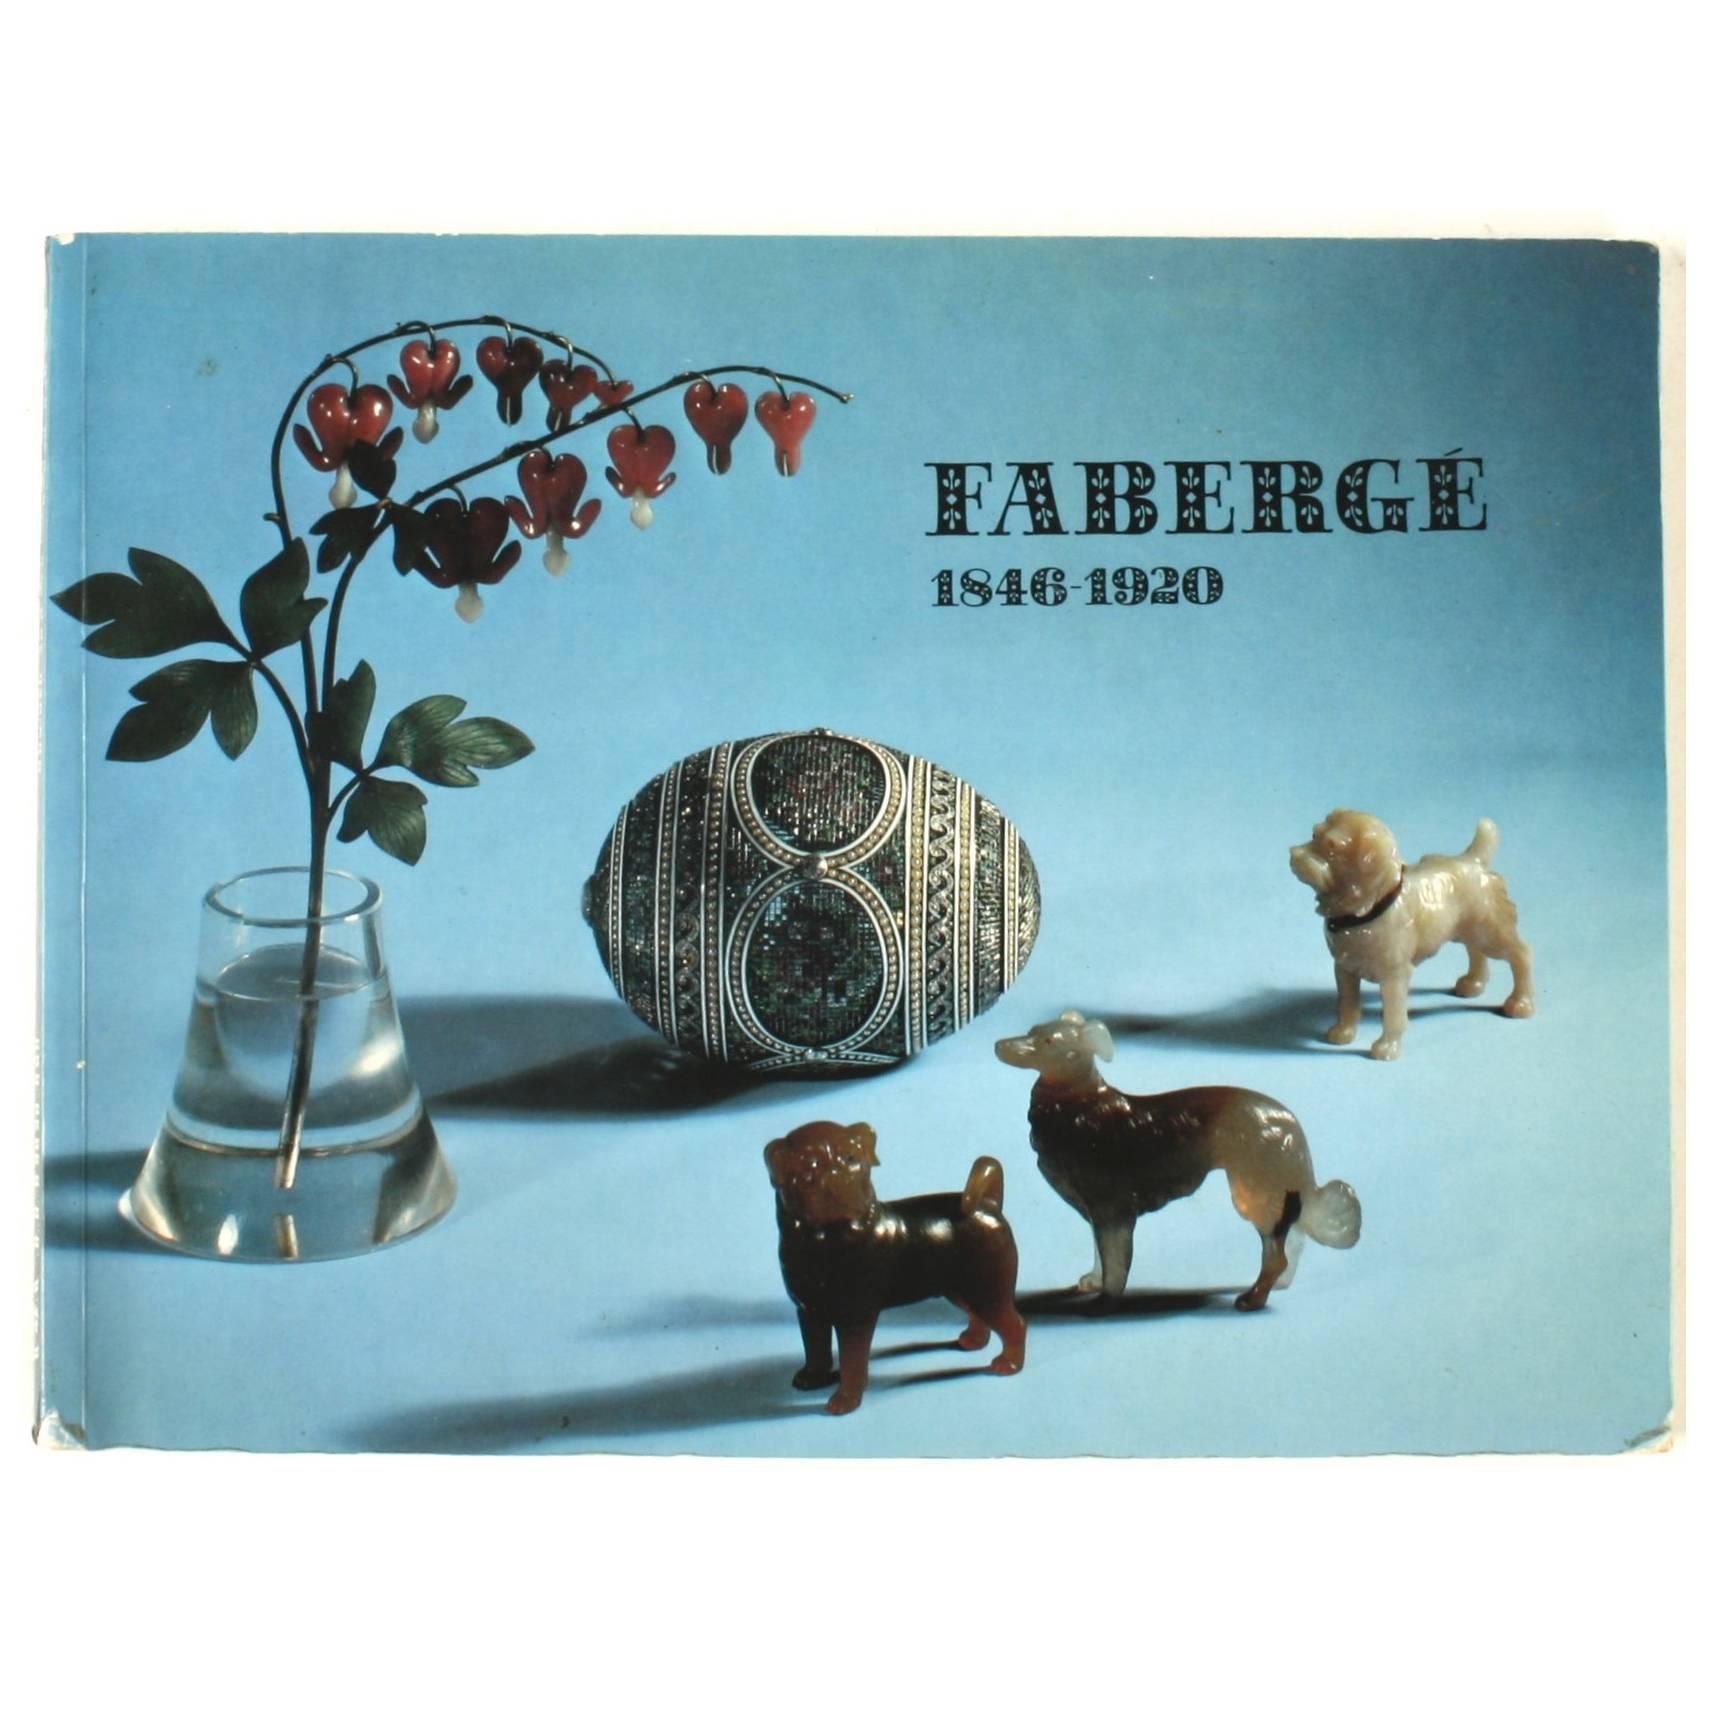 Faberge 1846-1920, First Edition